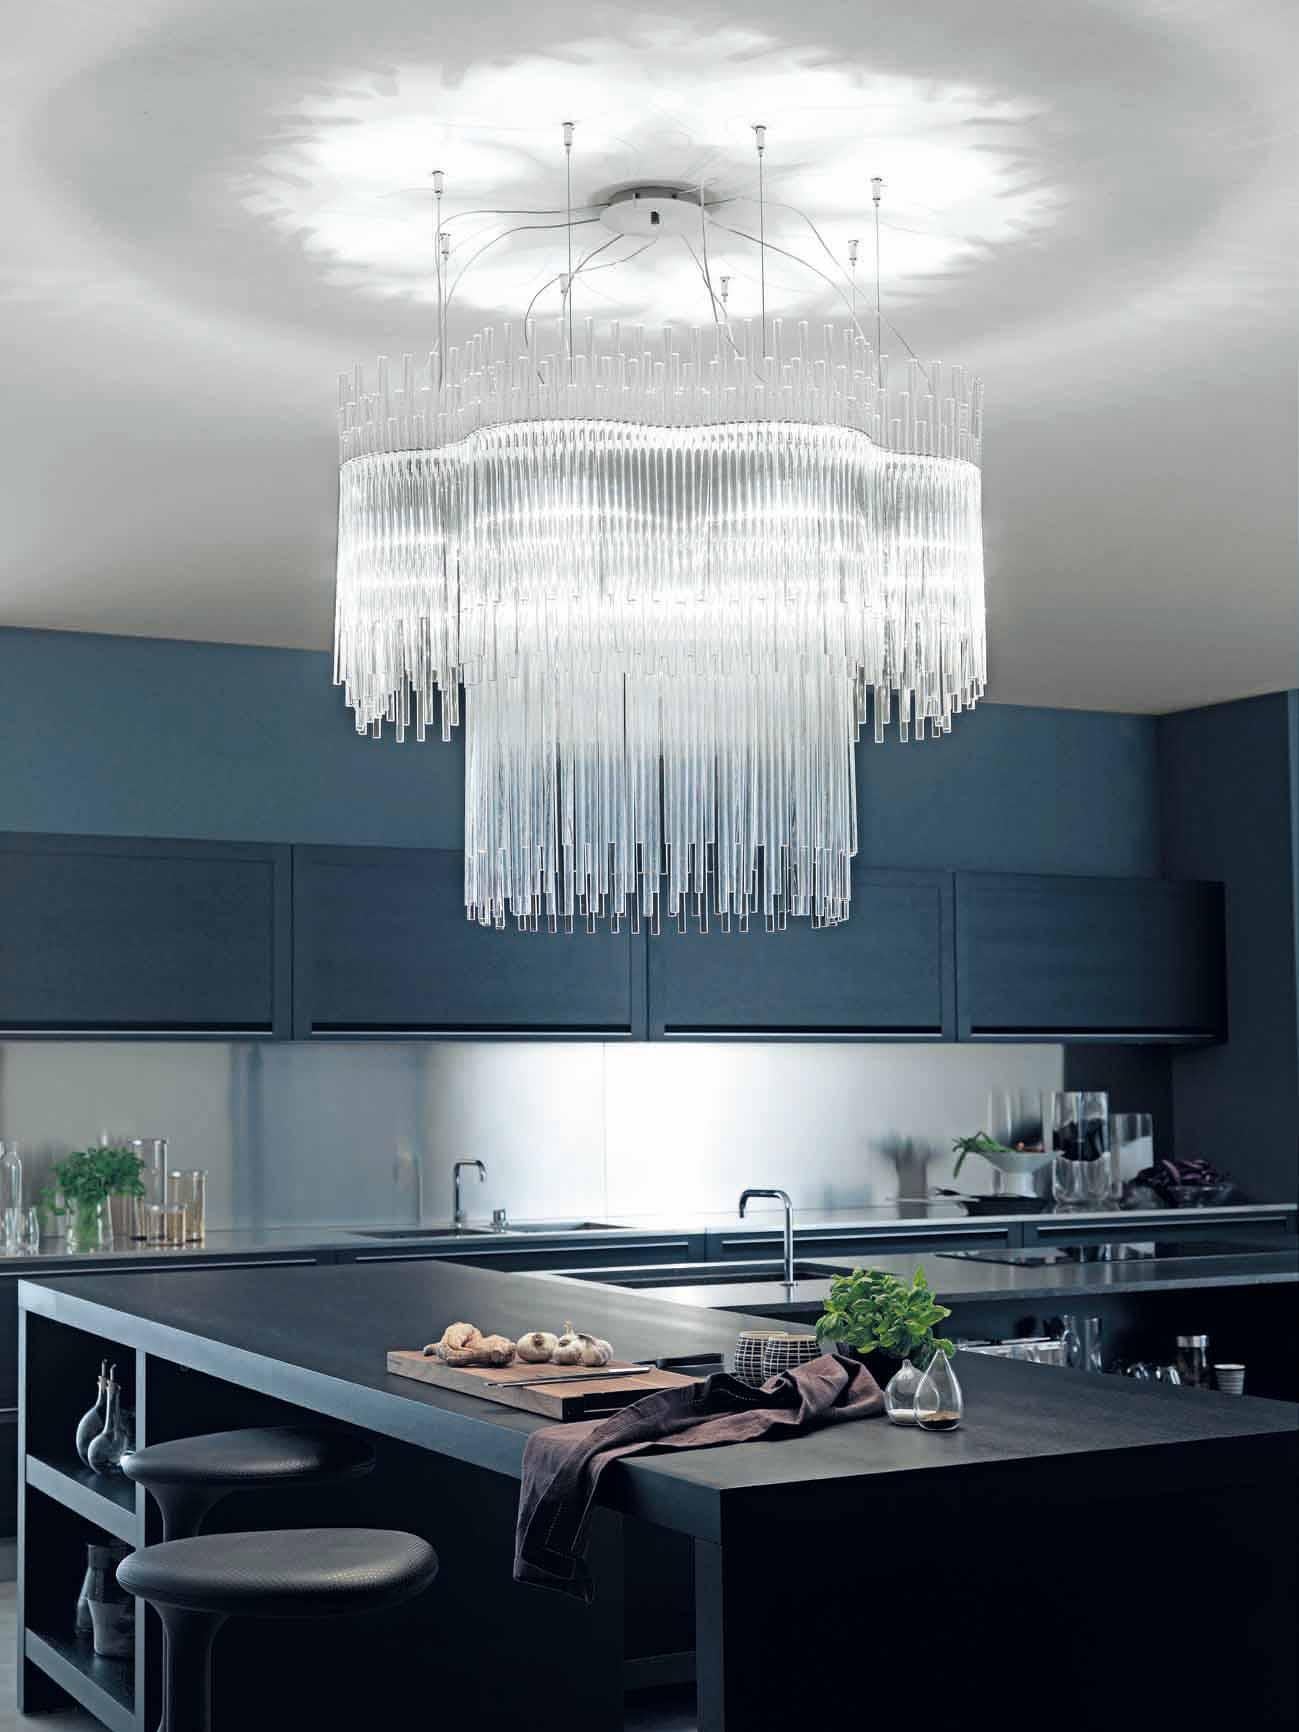 The Diadema collection is a lighting system based on a single element: a rod of pure glass. This crystal chandelier takes advantage of the way it reflects and transmits the light while offering a sense of movement by using rods of different sizes.